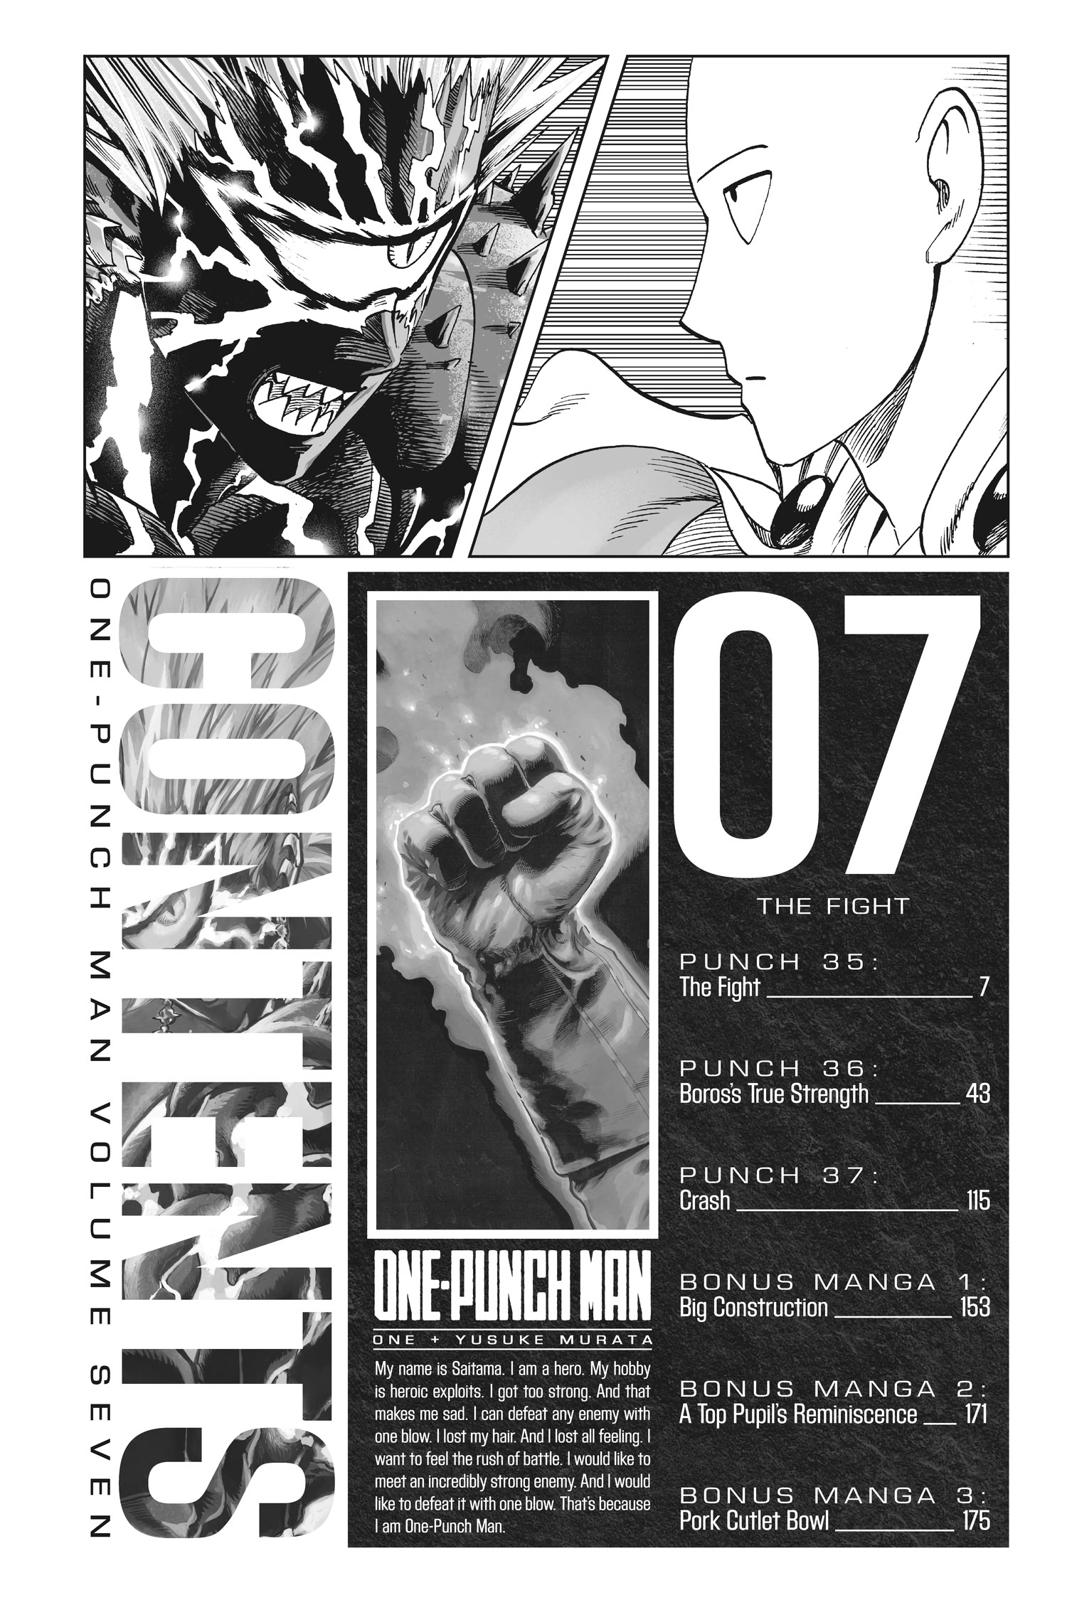 One-Punch Man, Punch 35 image 06